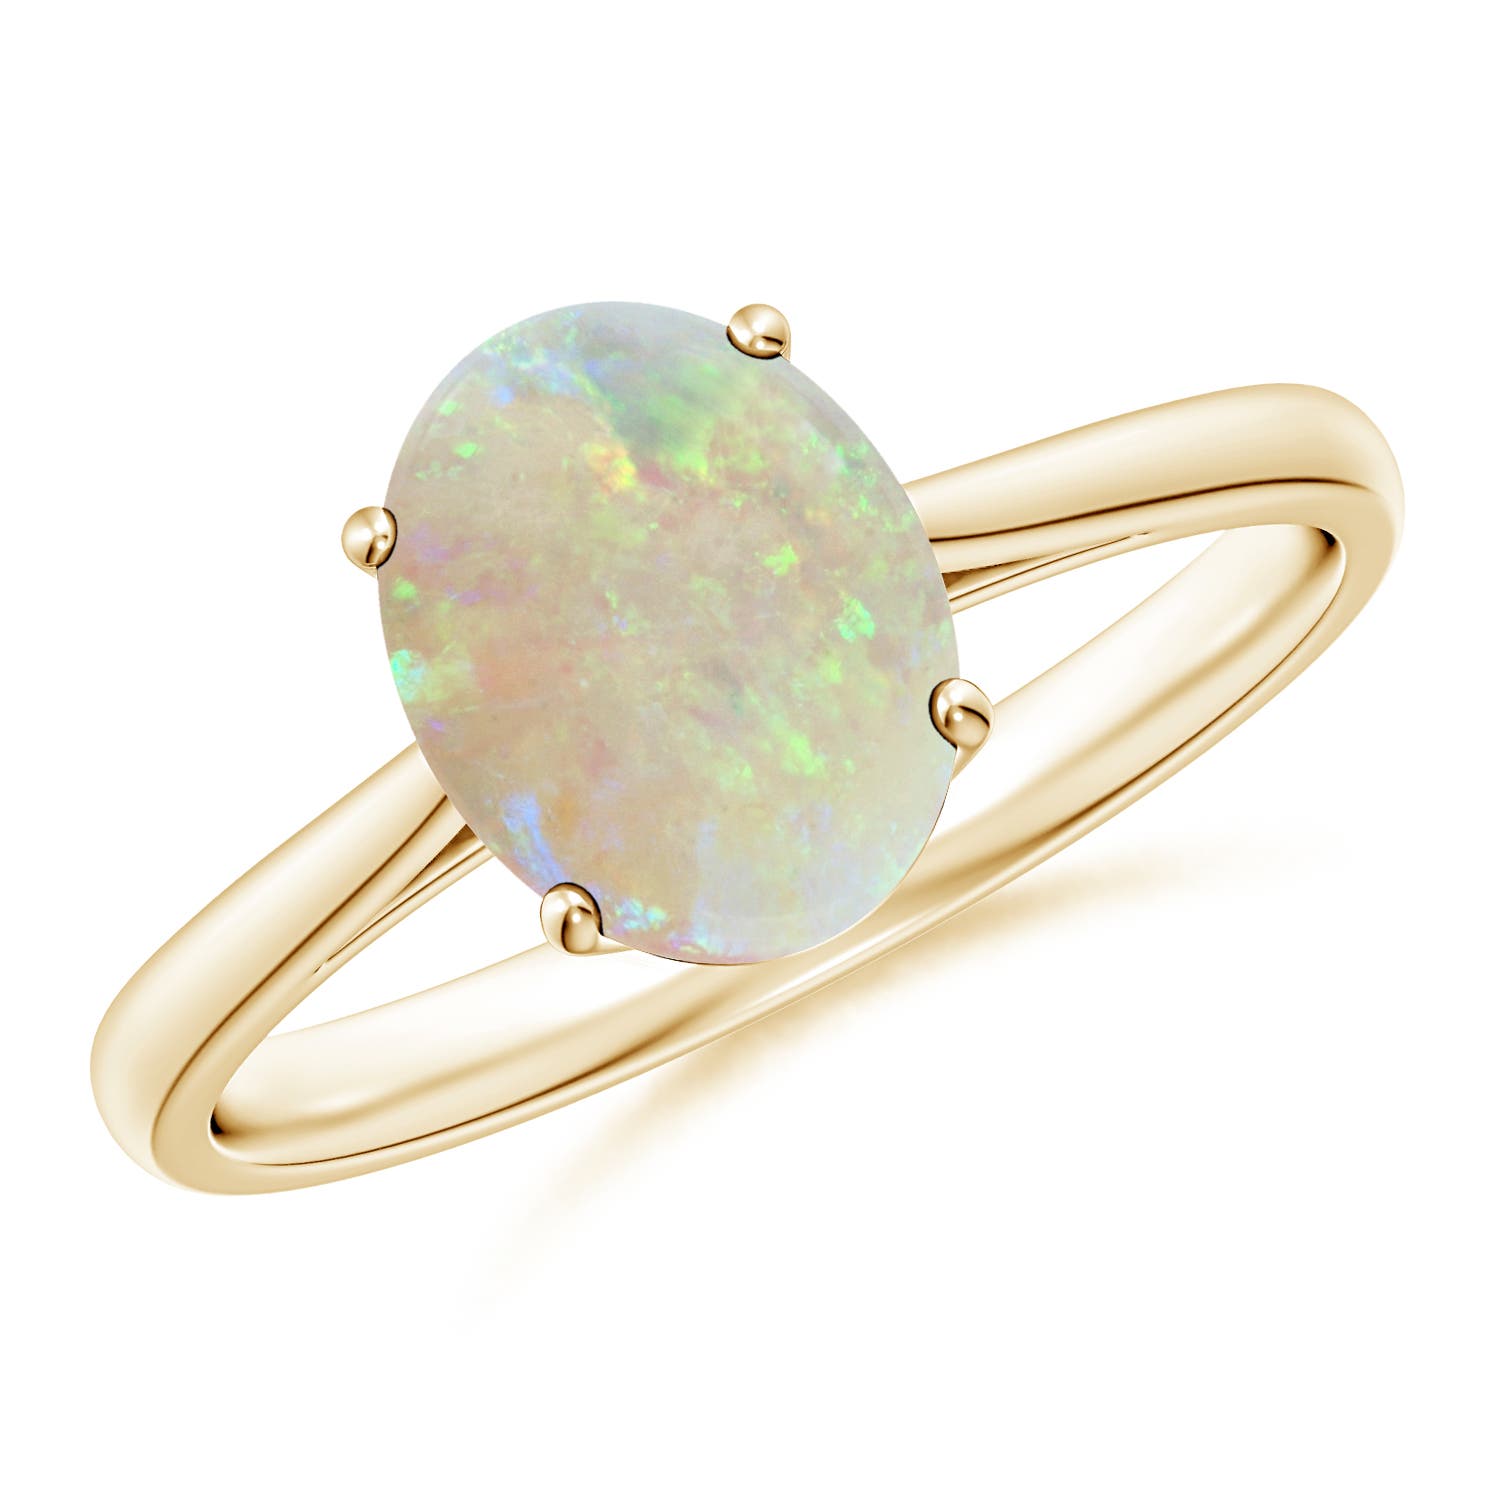 AAA - Opal / 1.1 CT / 14 KT Yellow Gold